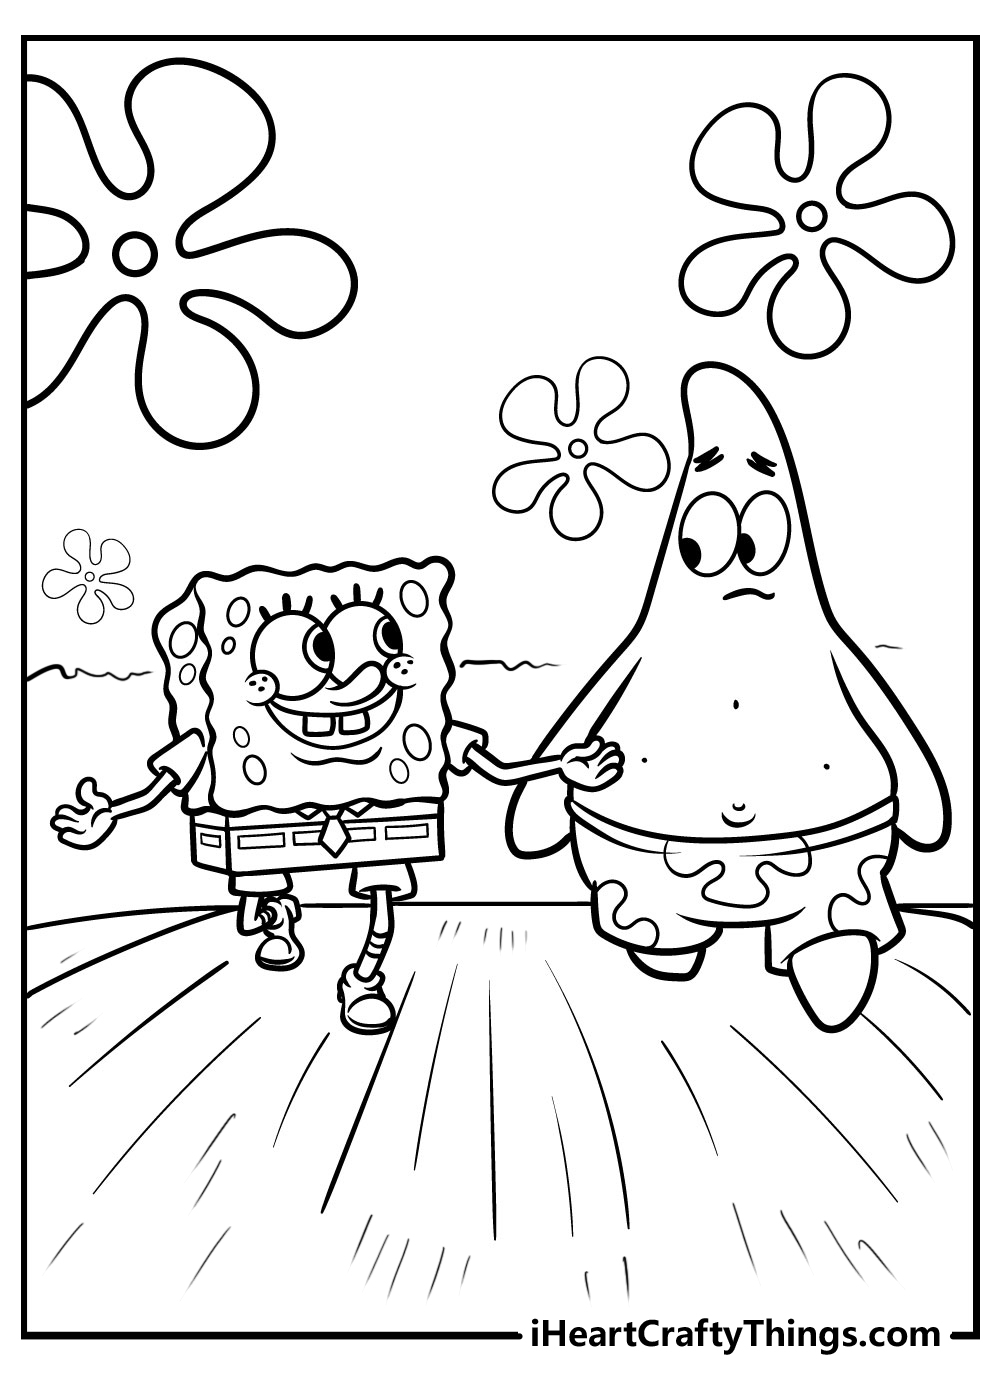 Printable Spongebob Coloring Pages For Kids Cool2bkids Cartoon Coloring